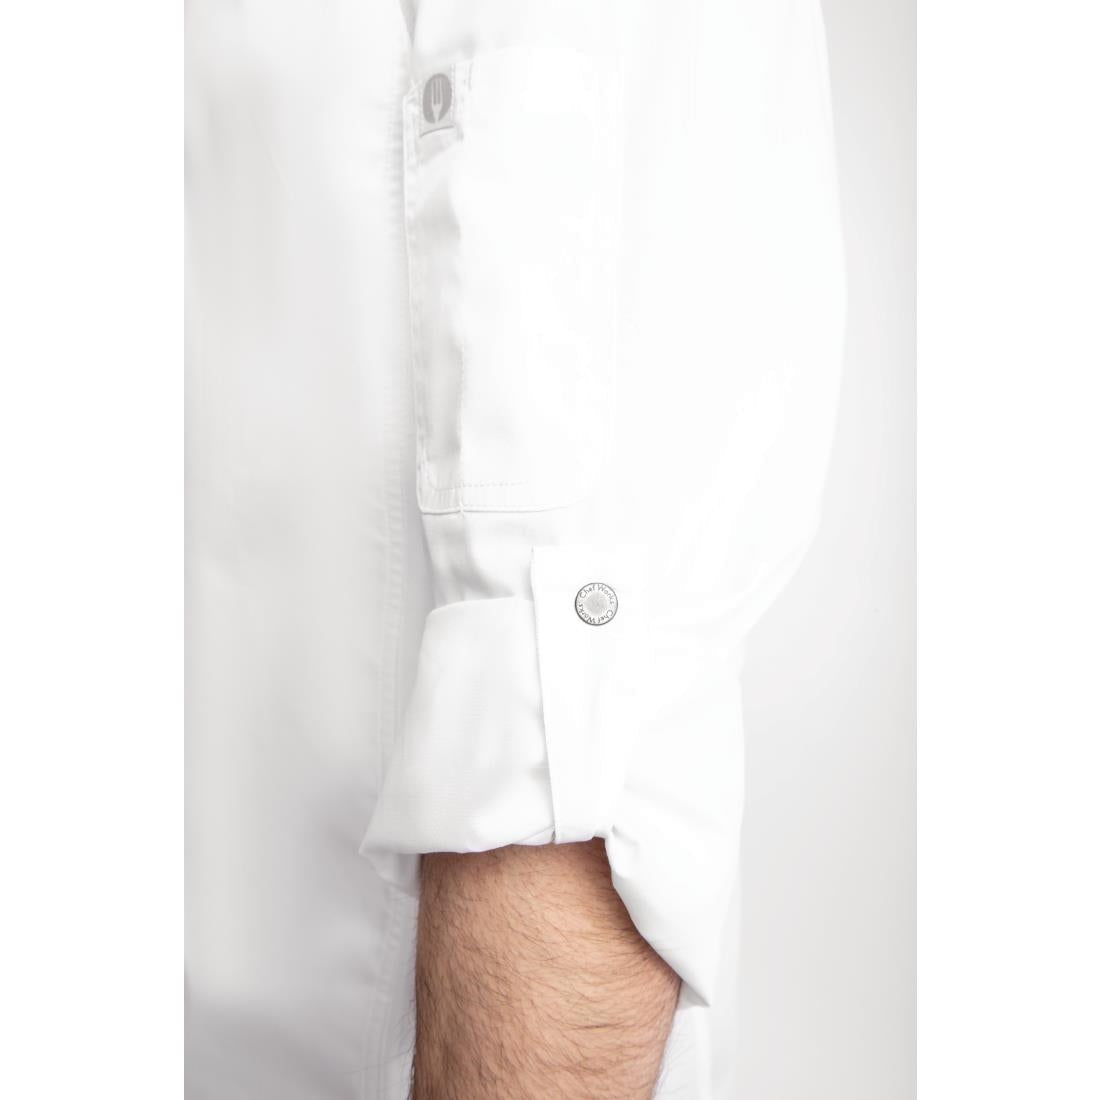 BB264-S Chef Works Unisex Hartford Lightweight Chef Jacket White Size S JD Catering Equipment Solutions Ltd